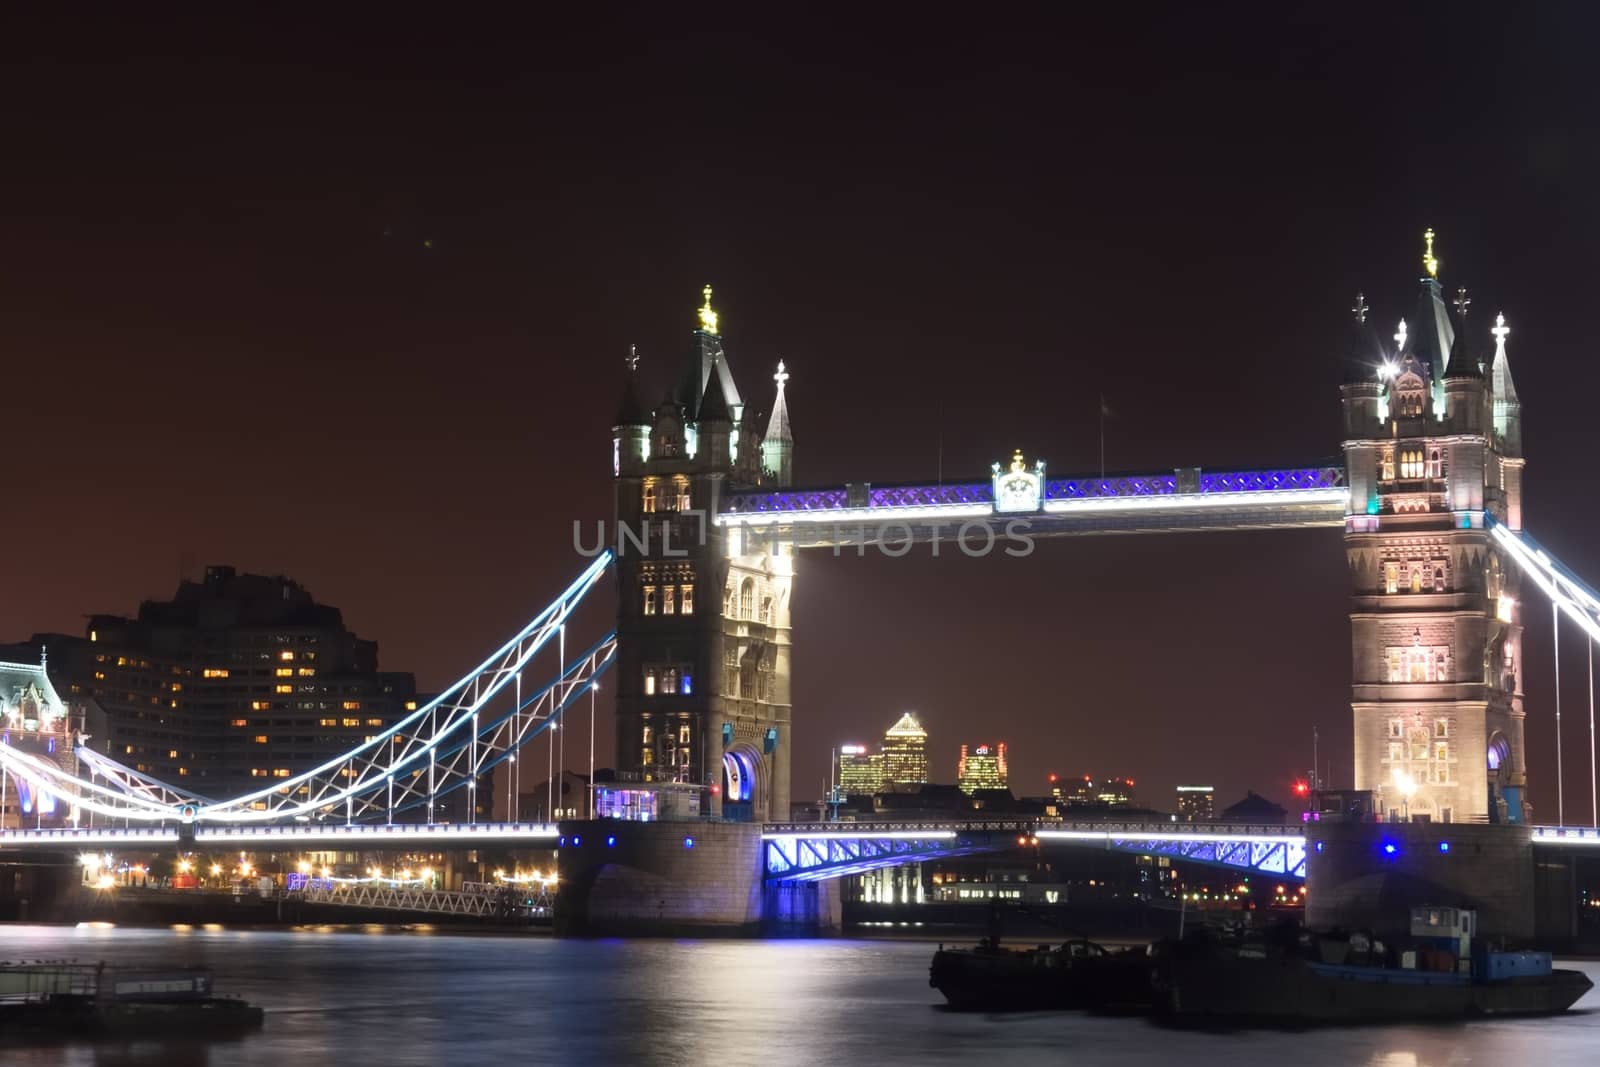 Tower Bridge at night time by pauws99